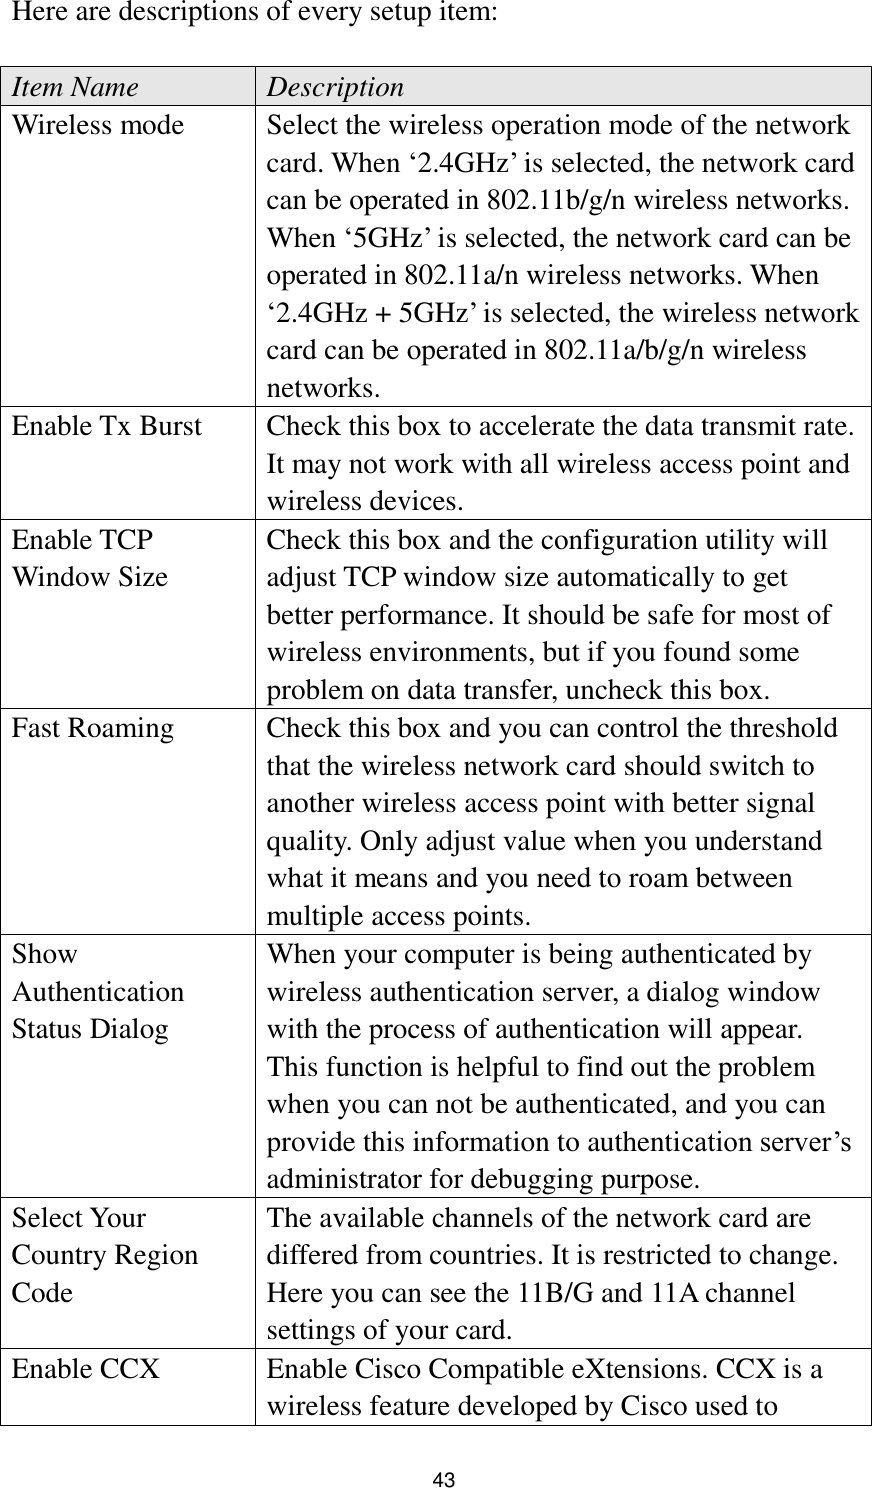  43 Here are descriptions of every setup item:  Item Name Description Wireless mode Select the wireless operation mode of the network card. When „2.4GHz‟ is selected, the network card can be operated in 802.11b/g/n wireless networks. When „5GHz‟ is selected, the network card can be operated in 802.11a/n wireless networks. When „2.4GHz + 5GHz‟ is selected, the wireless network card can be operated in 802.11a/b/g/n wireless networks. Enable Tx Burst Check this box to accelerate the data transmit rate. It may not work with all wireless access point and wireless devices. Enable TCP Window Size Check this box and the configuration utility will adjust TCP window size automatically to get better performance. It should be safe for most of wireless environments, but if you found some problem on data transfer, uncheck this box. Fast Roaming Check this box and you can control the threshold that the wireless network card should switch to another wireless access point with better signal quality. Only adjust value when you understand what it means and you need to roam between multiple access points. Show Authentication Status Dialog When your computer is being authenticated by wireless authentication server, a dialog window with the process of authentication will appear. This function is helpful to find out the problem when you can not be authenticated, and you can provide this information to authentication server‟s administrator for debugging purpose. Select Your Country Region Code The available channels of the network card are differed from countries. It is restricted to change. Here you can see the 11B/G and 11A channel settings of your card. Enable CCX Enable Cisco Compatible eXtensions. CCX is a wireless feature developed by Cisco used to 